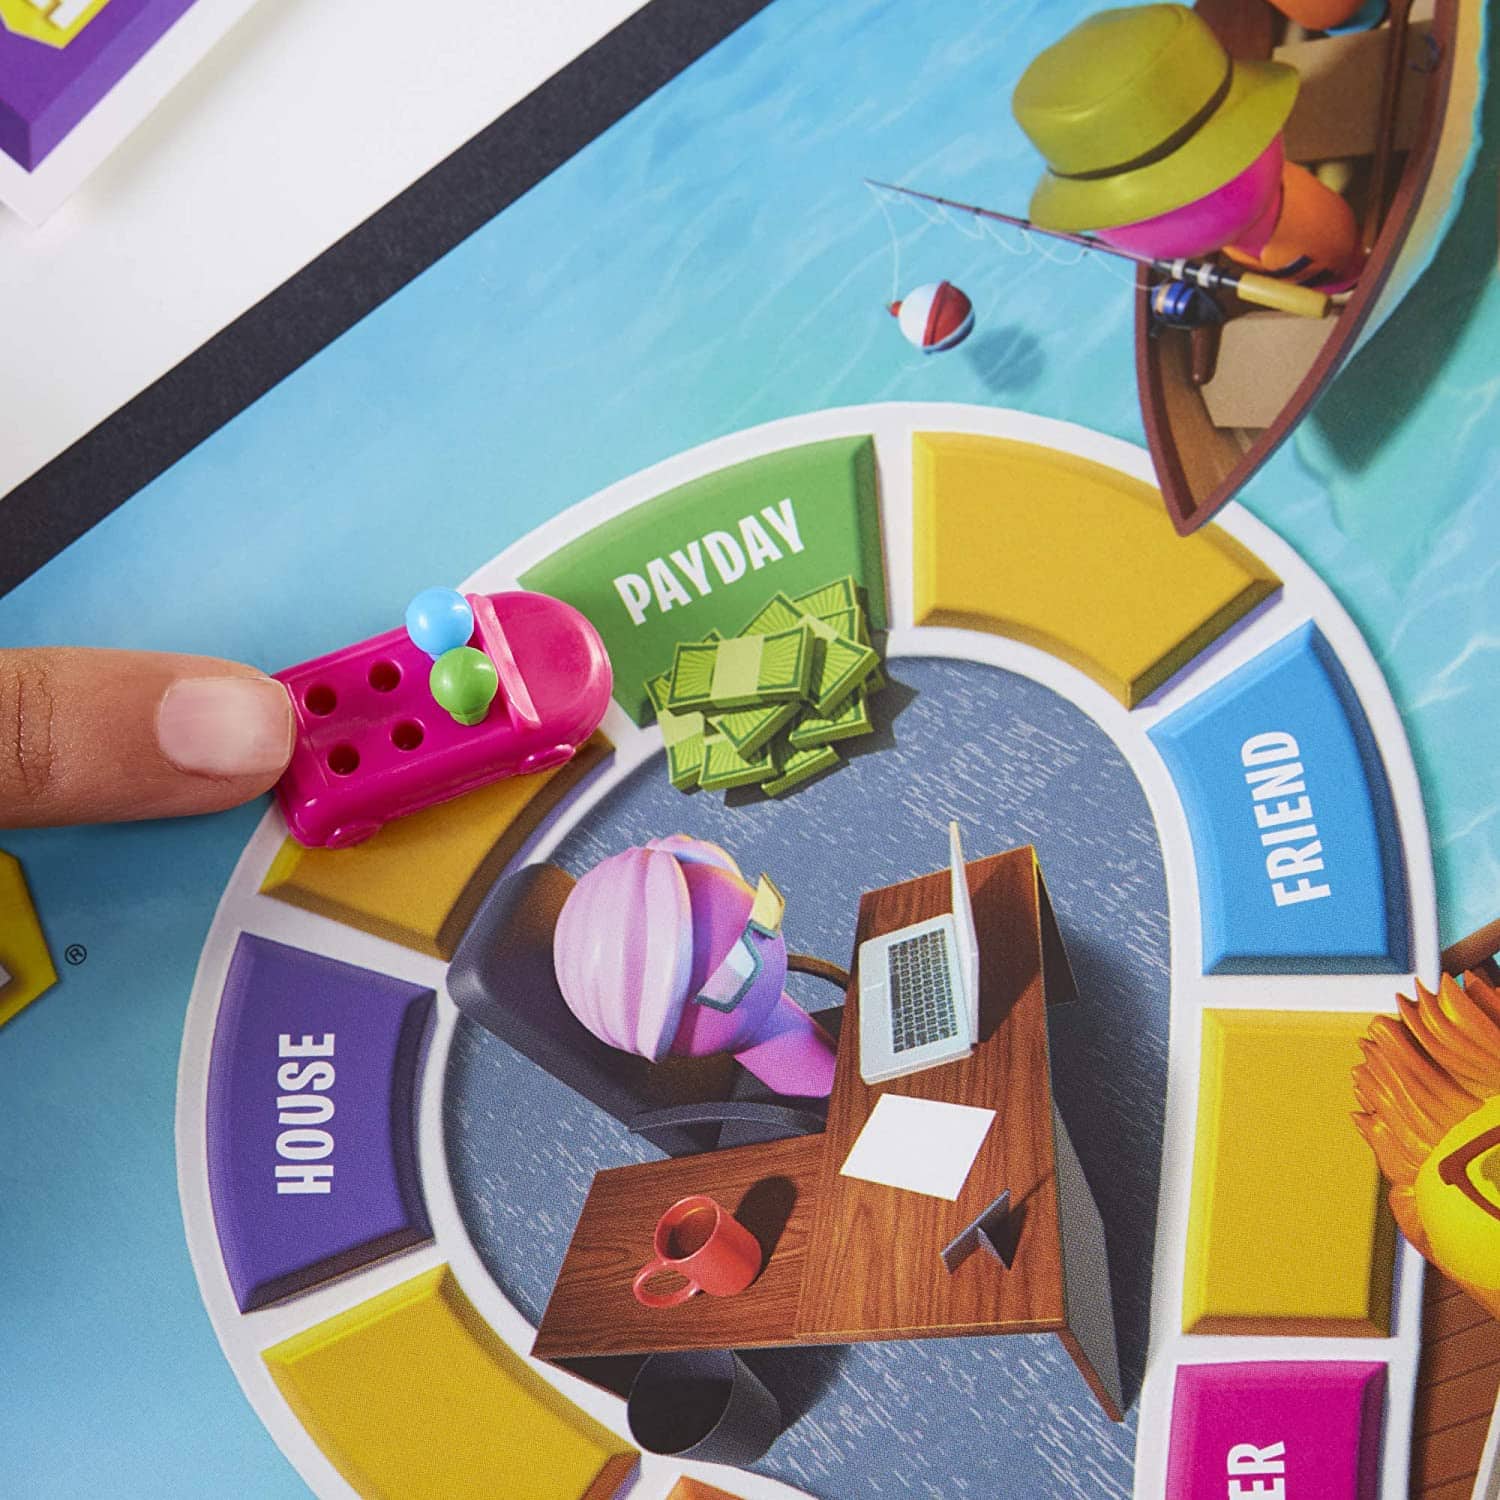 Game of Life 2021 'Your Life Your Way' in a lifestyle photoshoot with a close up on a pink car with 2 multi color pegs. Made by Hasbro Gaming